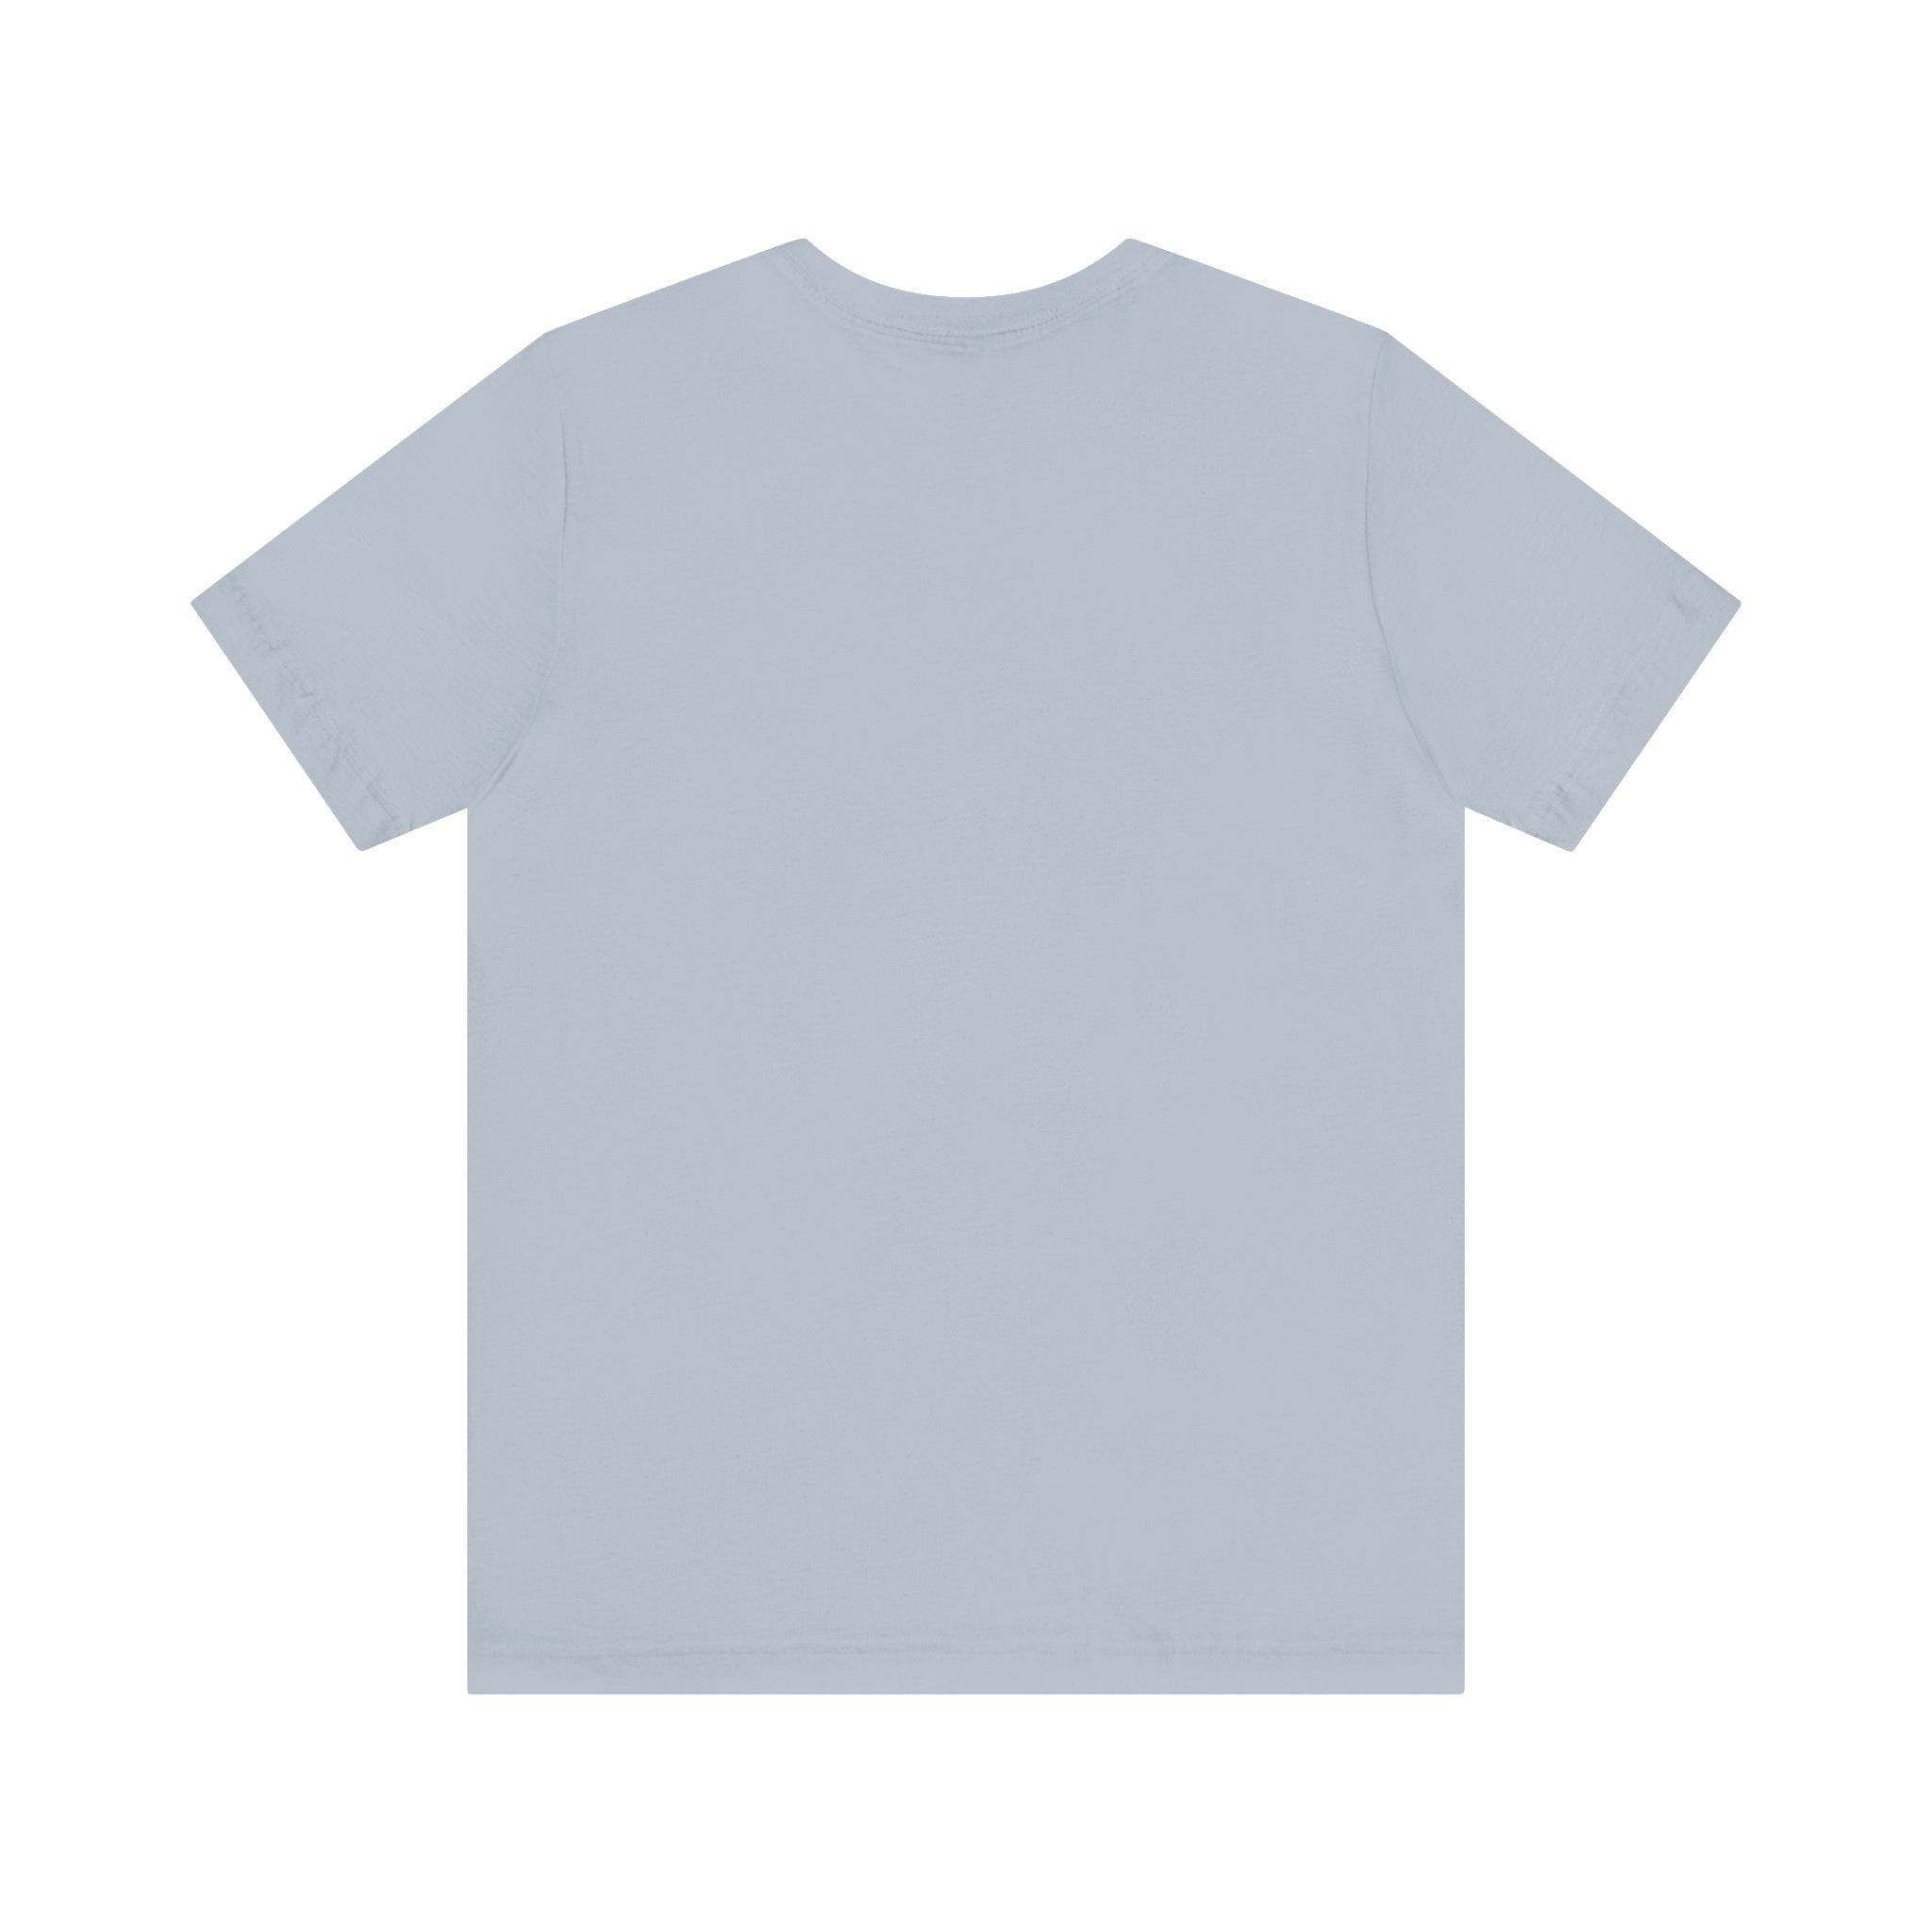 A plain light gray C-Ho-Co-La-Te - T-Shirt in a back view on a white background, crafted from soft Airlume cotton, perfect for any fashion-forward wardrobe.